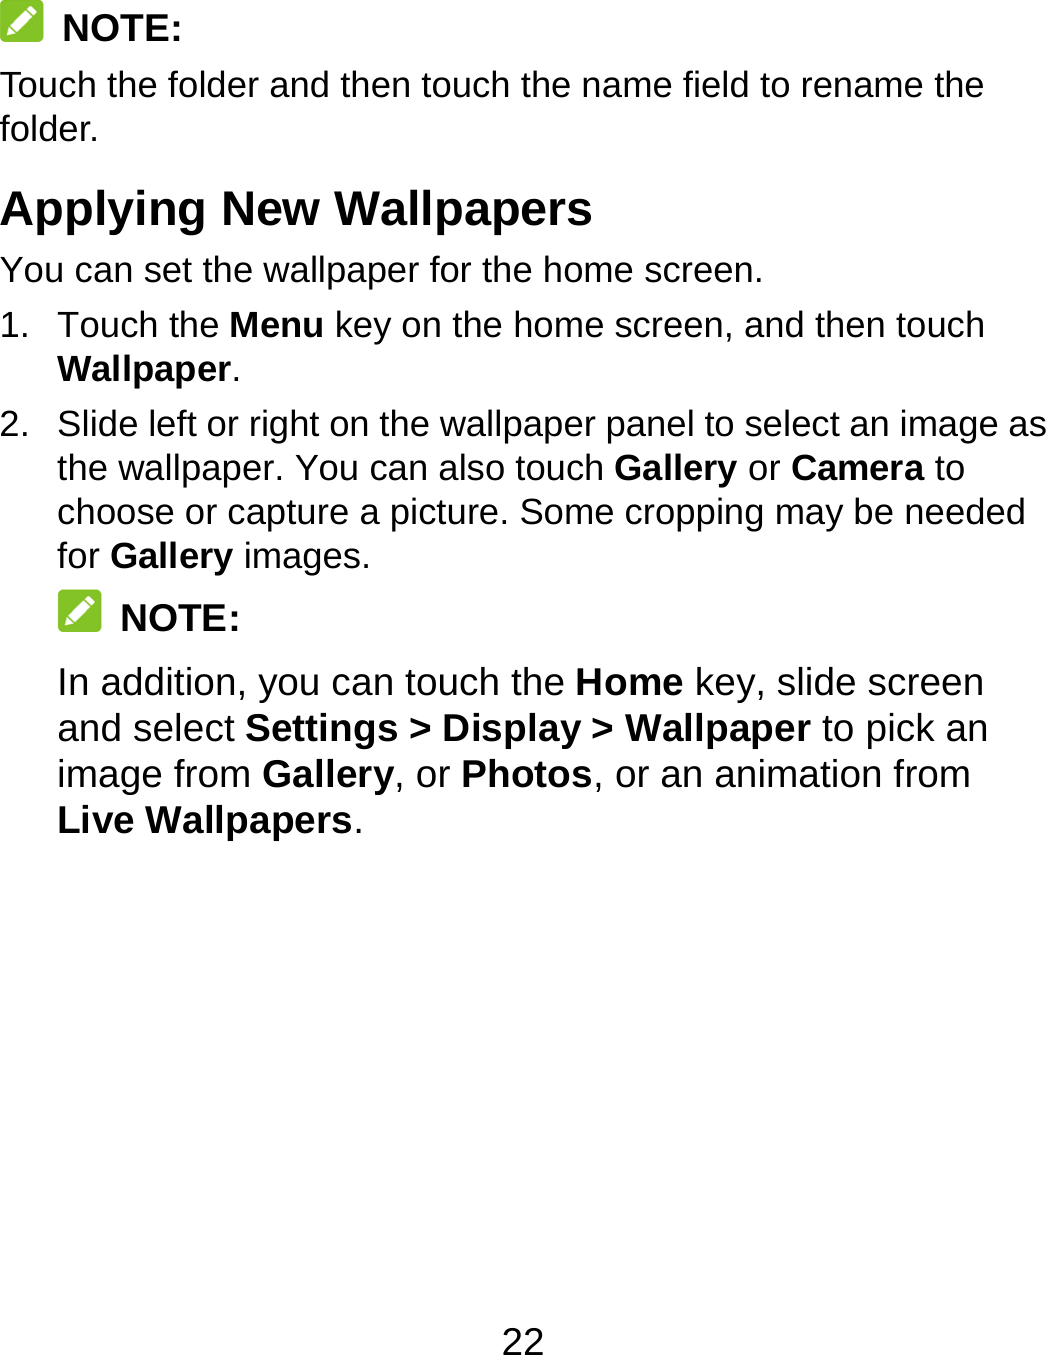 22  NOTE: Touch the folder and then touch the name field to rename the folder. Applying New Wallpapers You can set the wallpaper for the home screen. 1. Touch the Menu key on the home screen, and then touch Wallpaper.  2.  Slide left or right on the wallpaper panel to select an image as the wallpaper. You can also touch Gallery or Camera to choose or capture a picture. Some cropping may be needed for Gallery images.  NOTE:  In addition, you can touch the Home key, slide screen and select Settings &gt; Display &gt; Wallpaper to pick an image from Gallery, or Photos, or an animation from Live Wallpapers. 